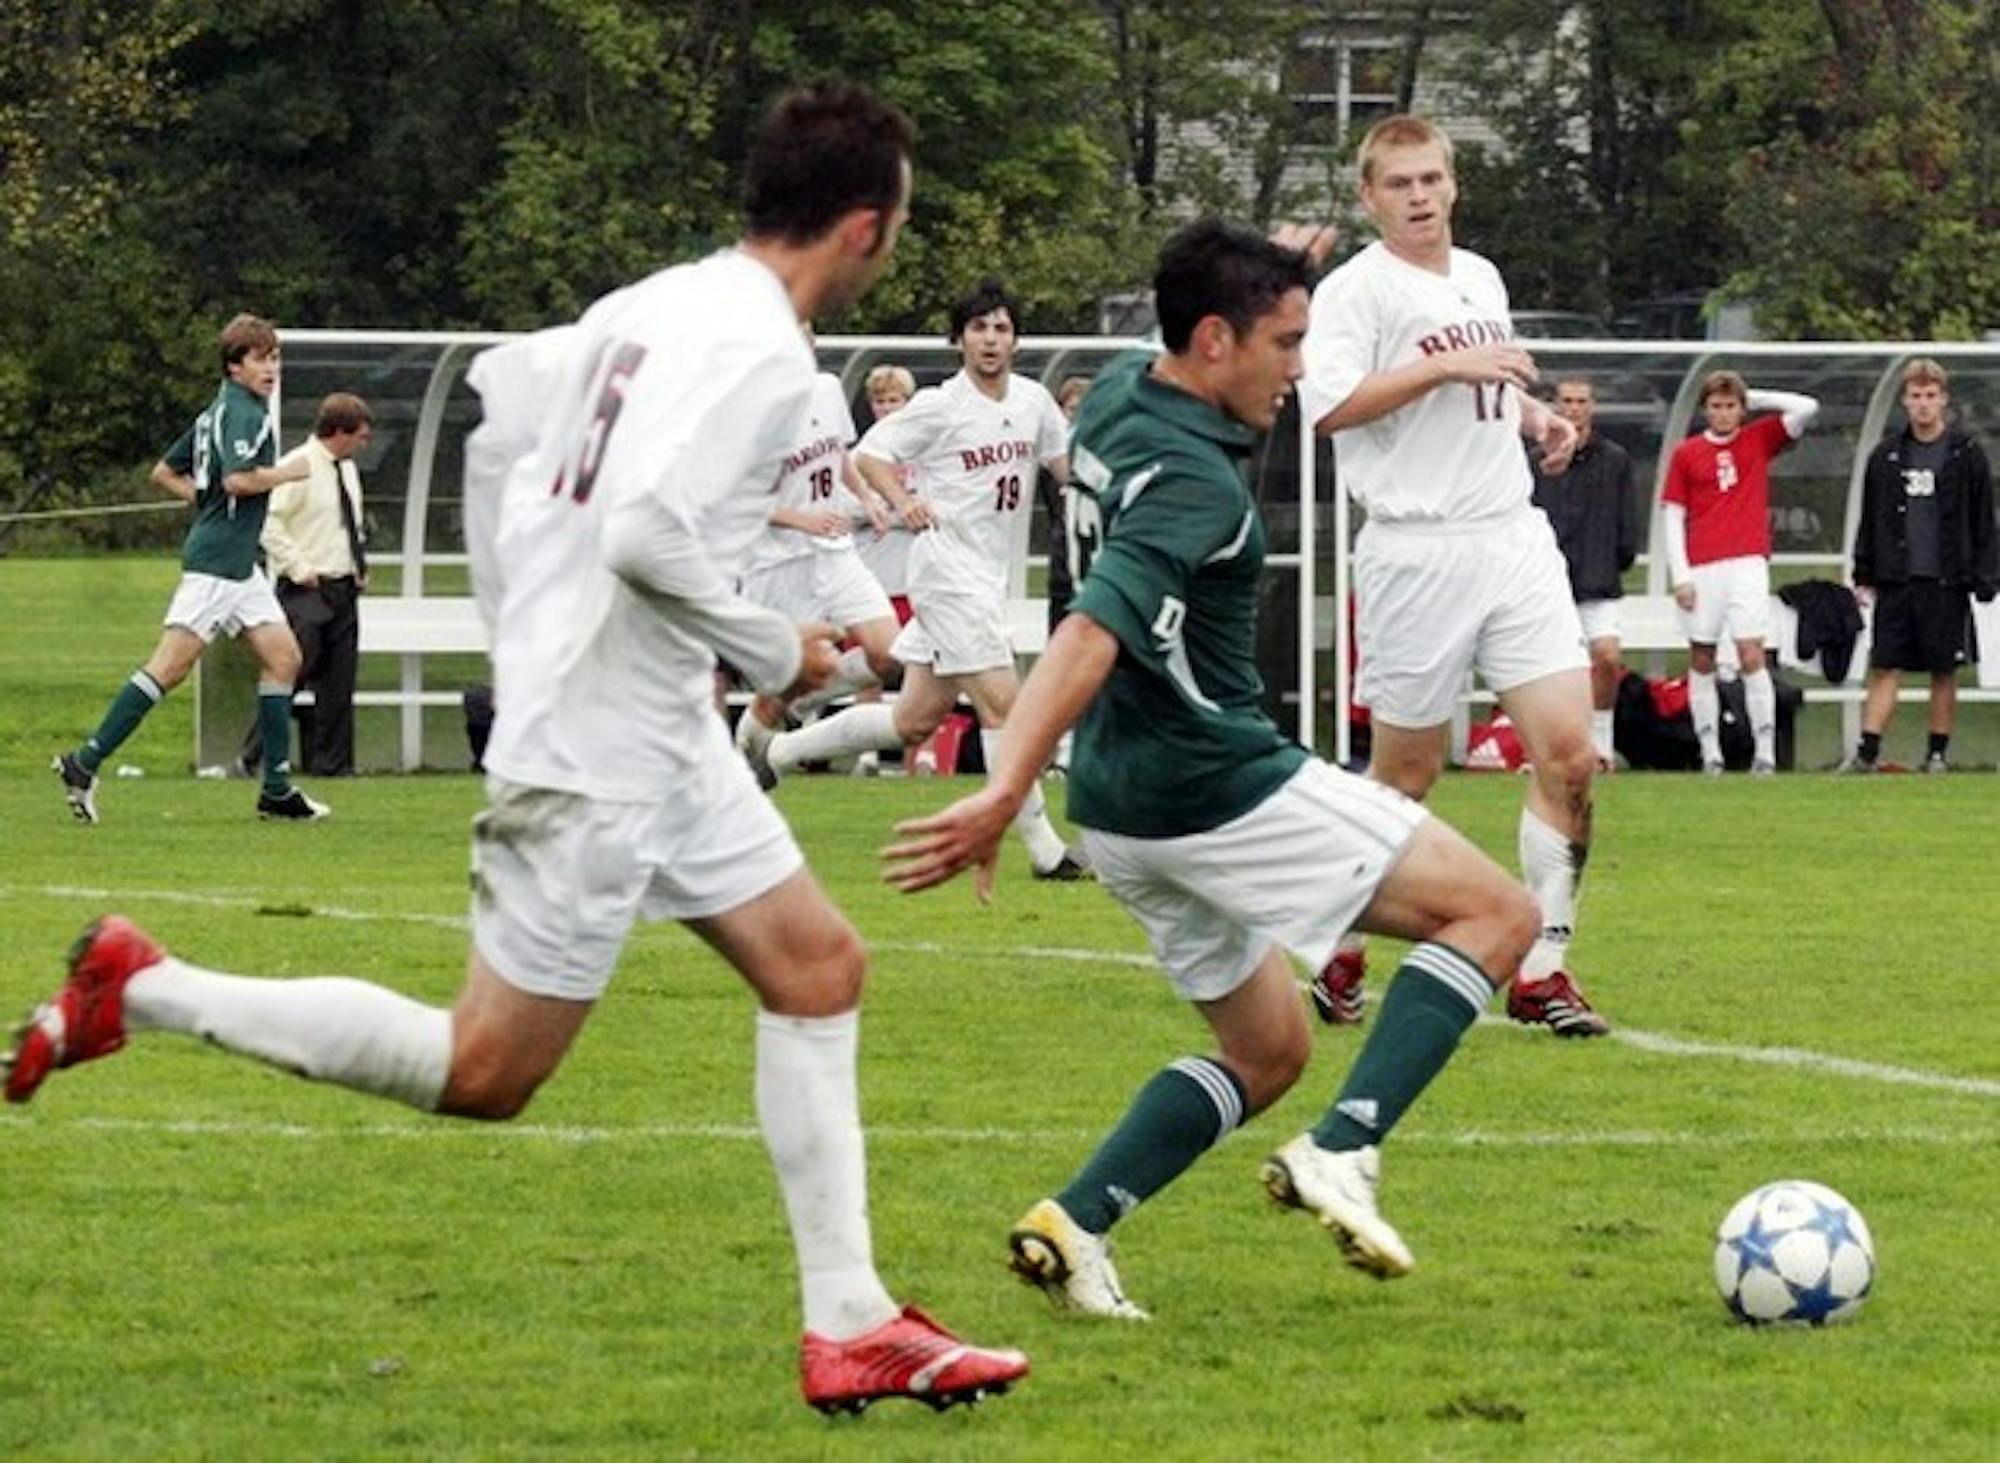 Dartmouth soccer will look to rebound next weekend against Yale.